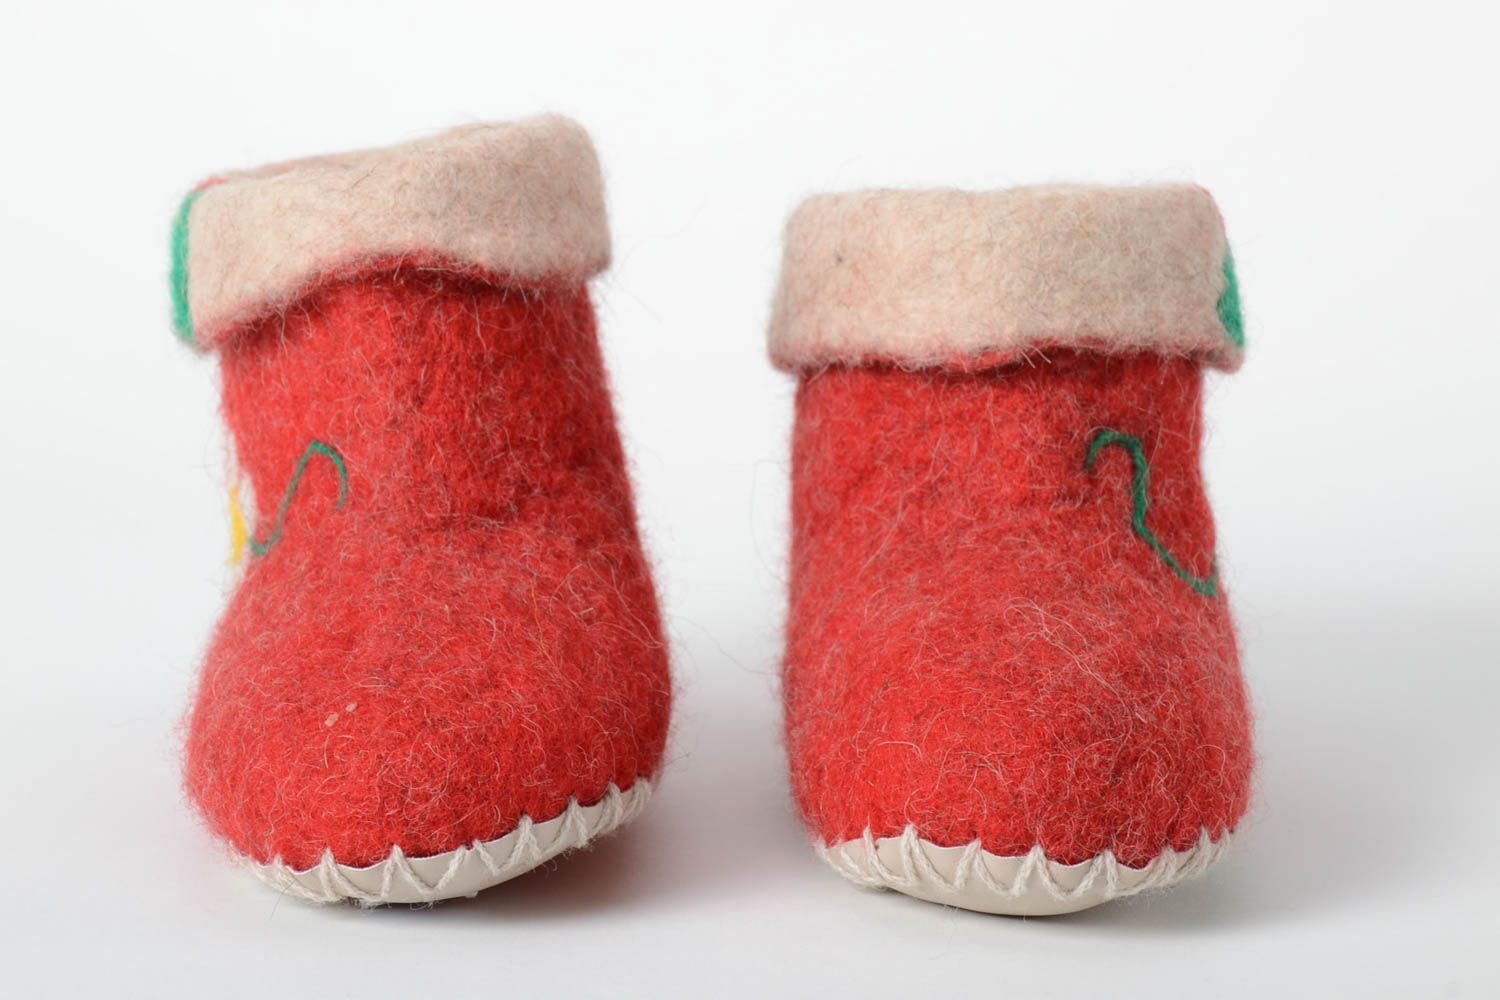 Handmade room slippers stylish shoes for home unusual warm slippers cute gift photo 2